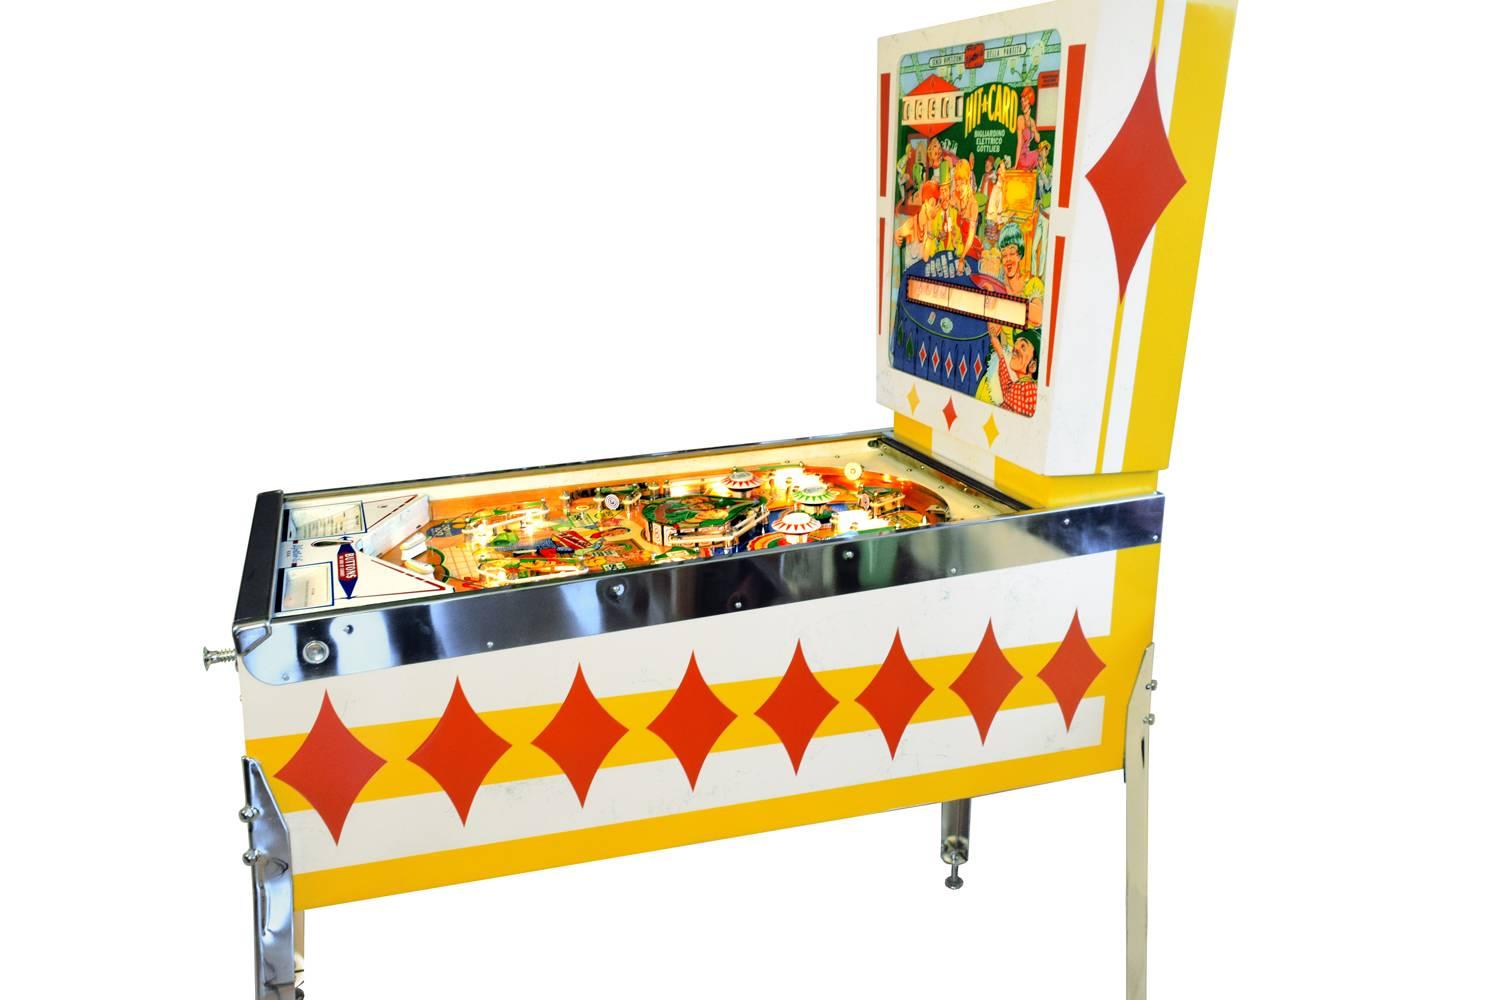 Hit a Card
Make: Gottlieb
Date of Built: March 1967
Designer: Ed Krynski
Artwork: Art Stenholm
Number made: 1.600
Origin: Naples, Italy
A Classic Gottlieb 1-player wedge head pinball game from the late 1960s. Another game from designer genius